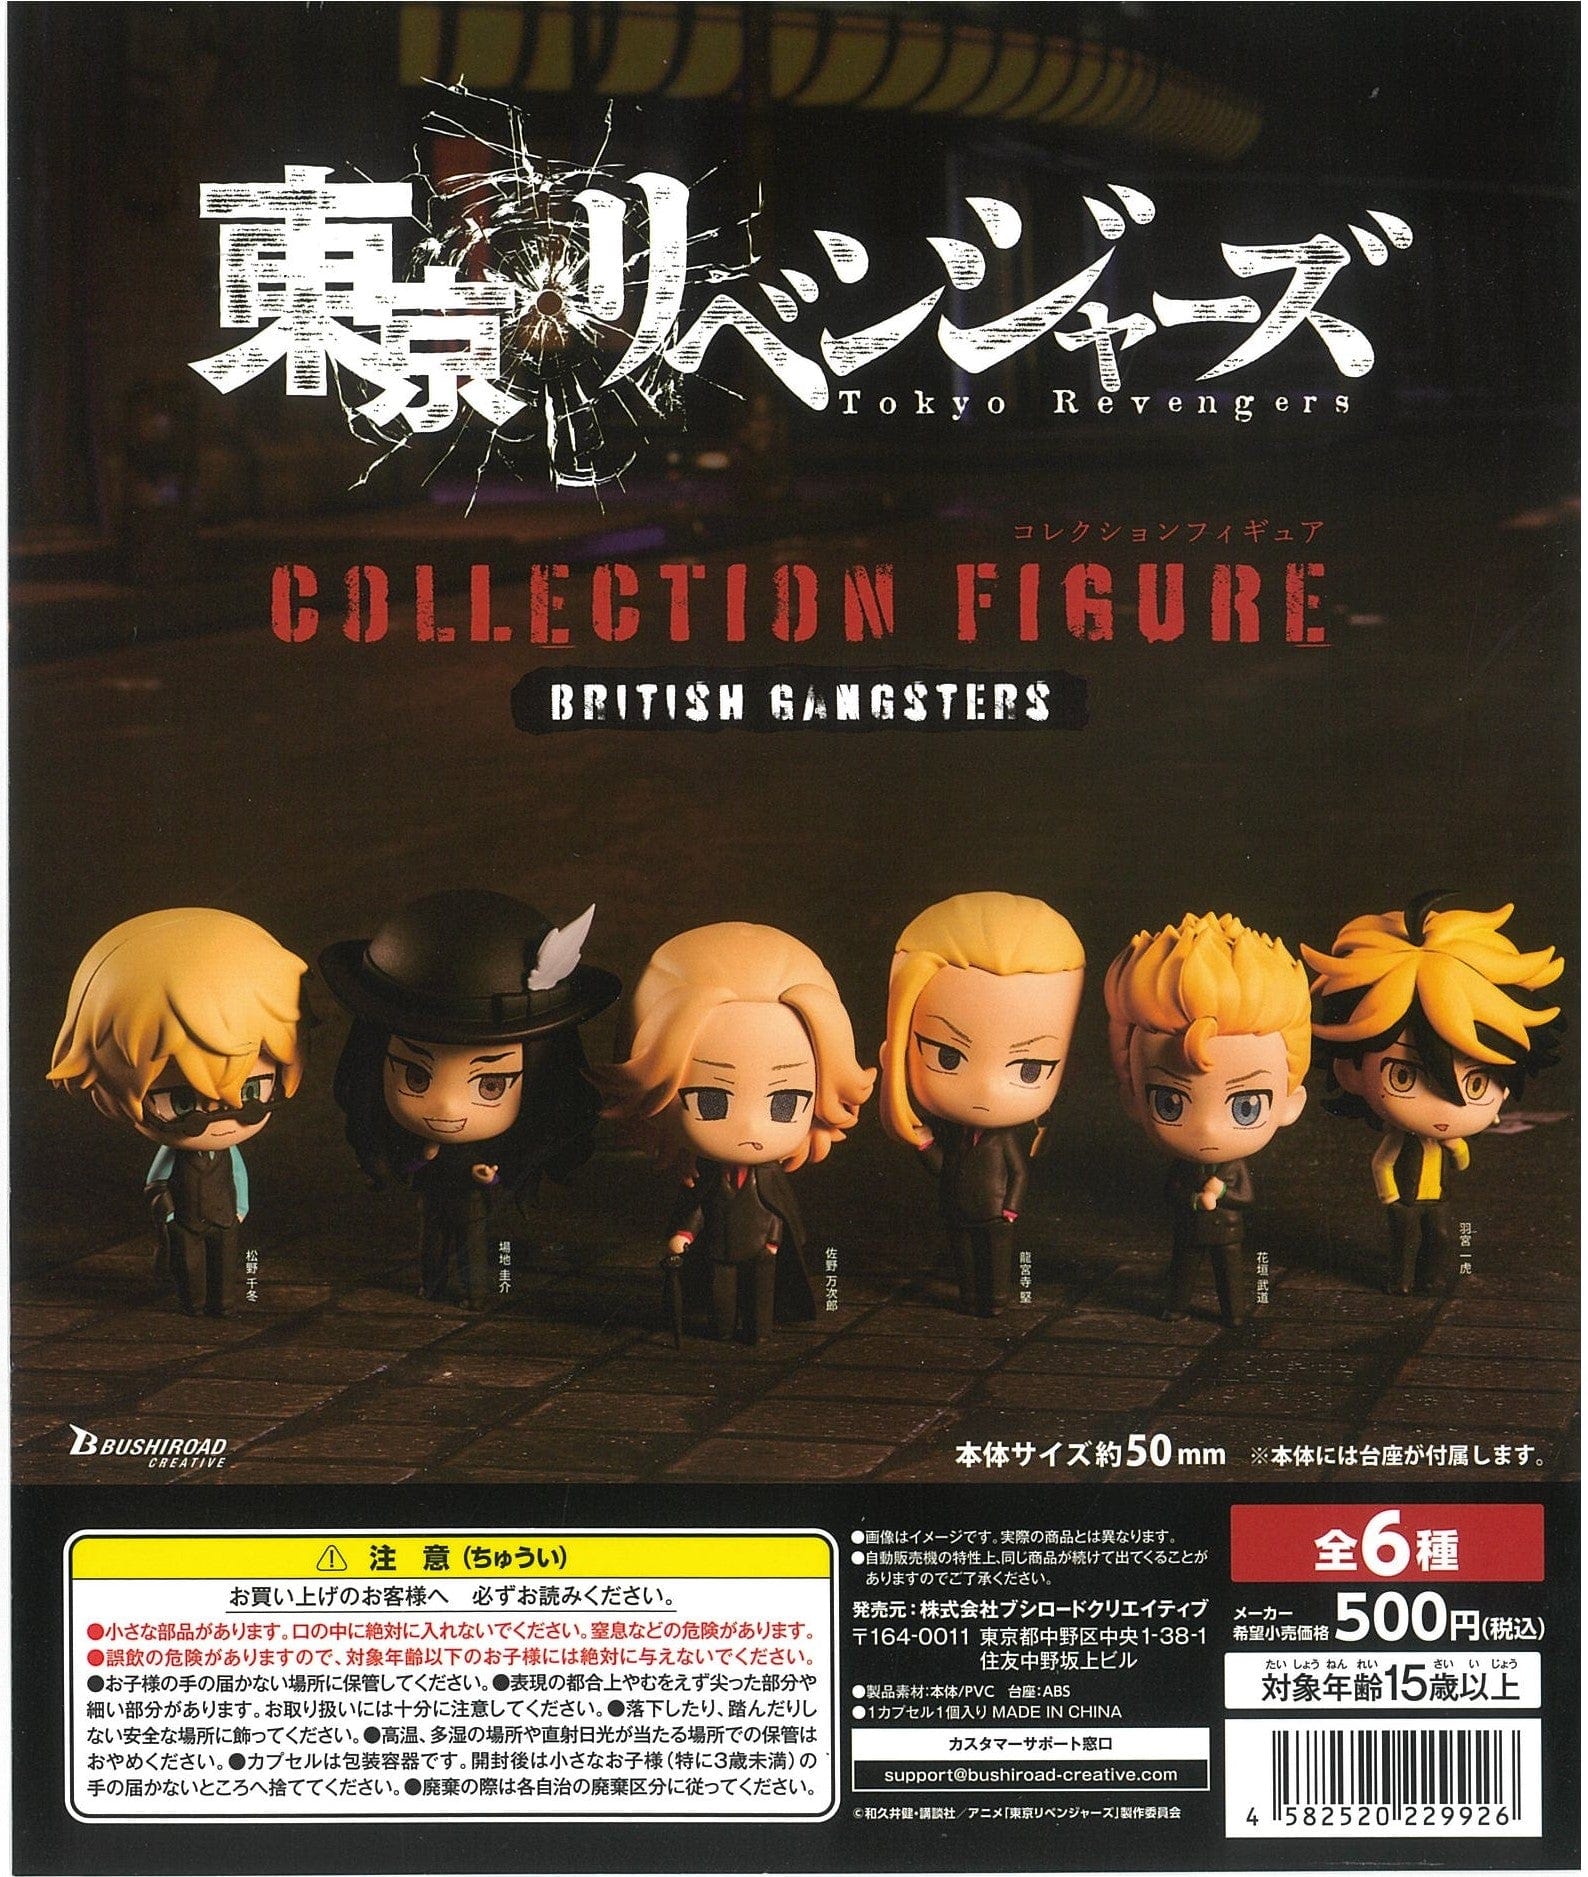 Bushiroad Creative CP1760 "Tokyo Revengers" Collection Figure British Gangsters